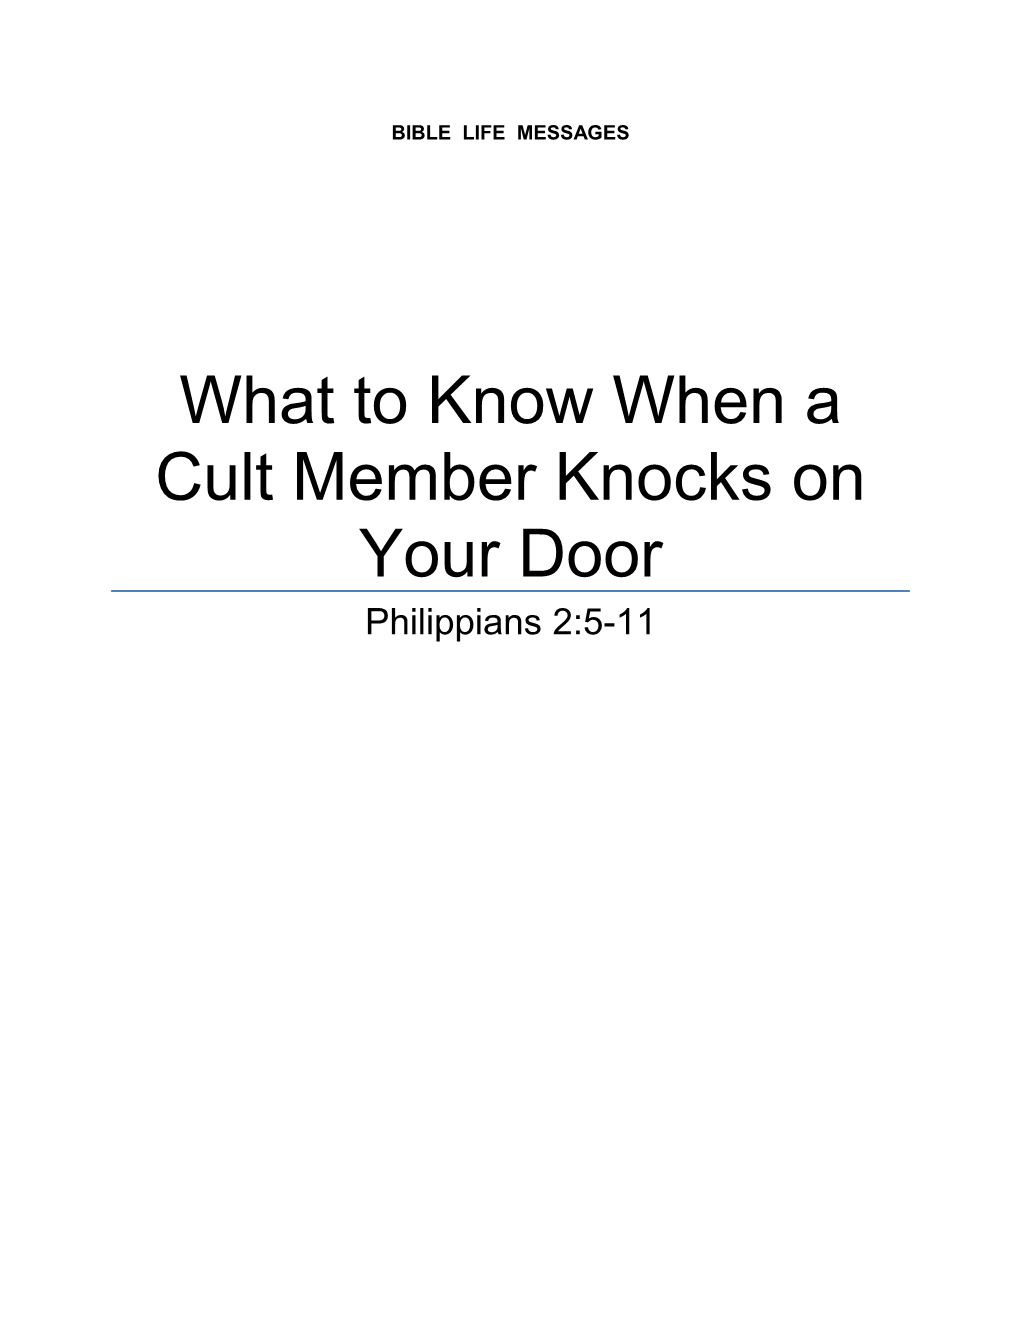 What to Know When a Cult Member Knocks on Your Door